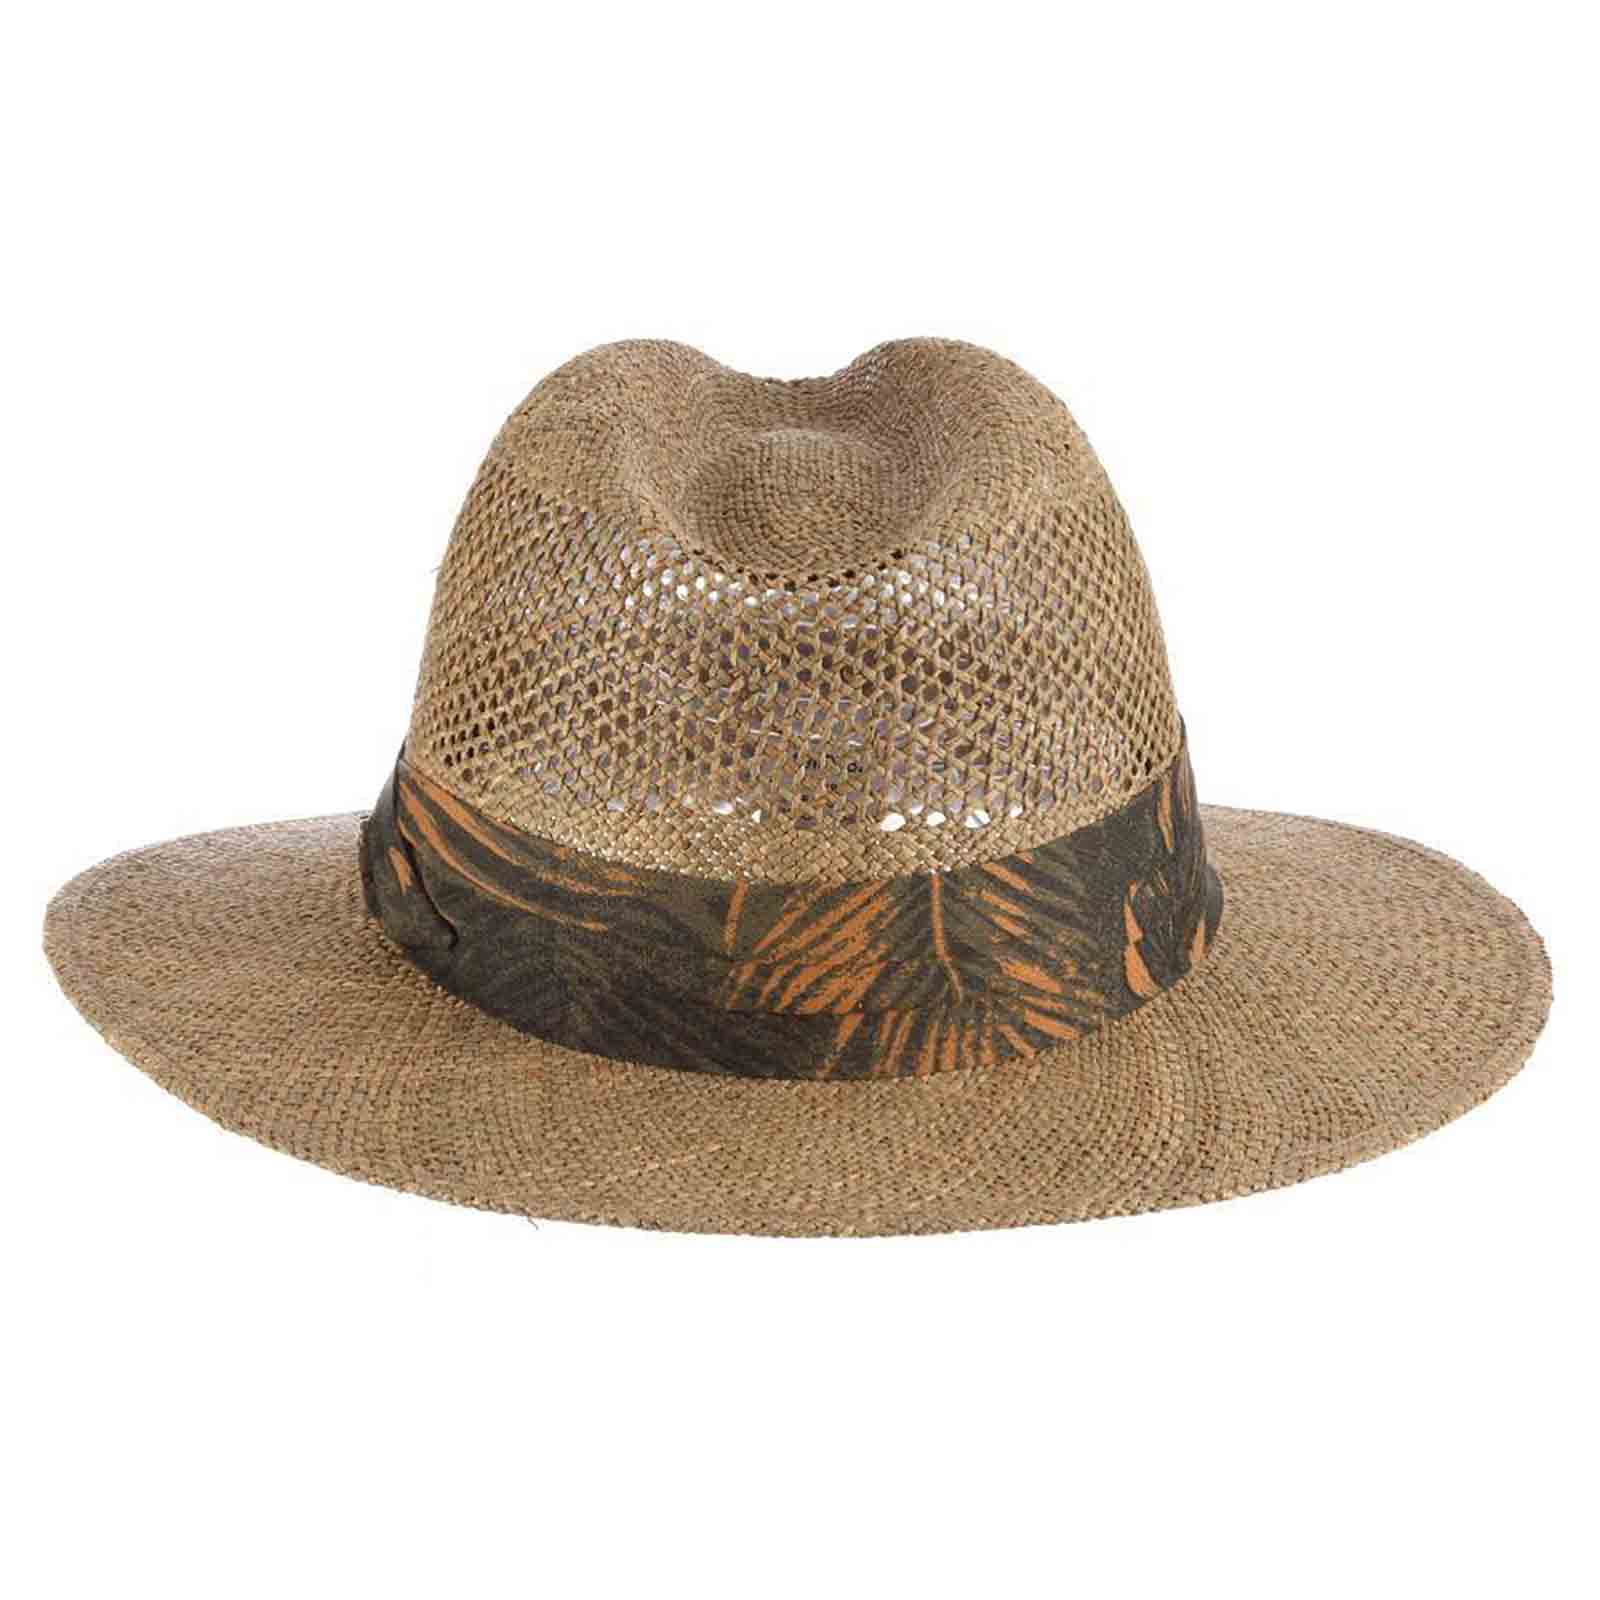 Los Cabos Vented Seagrass Safari Hat with Tropical Band - Tommy Bahama Safari Hat Tommy Bahama Hats    